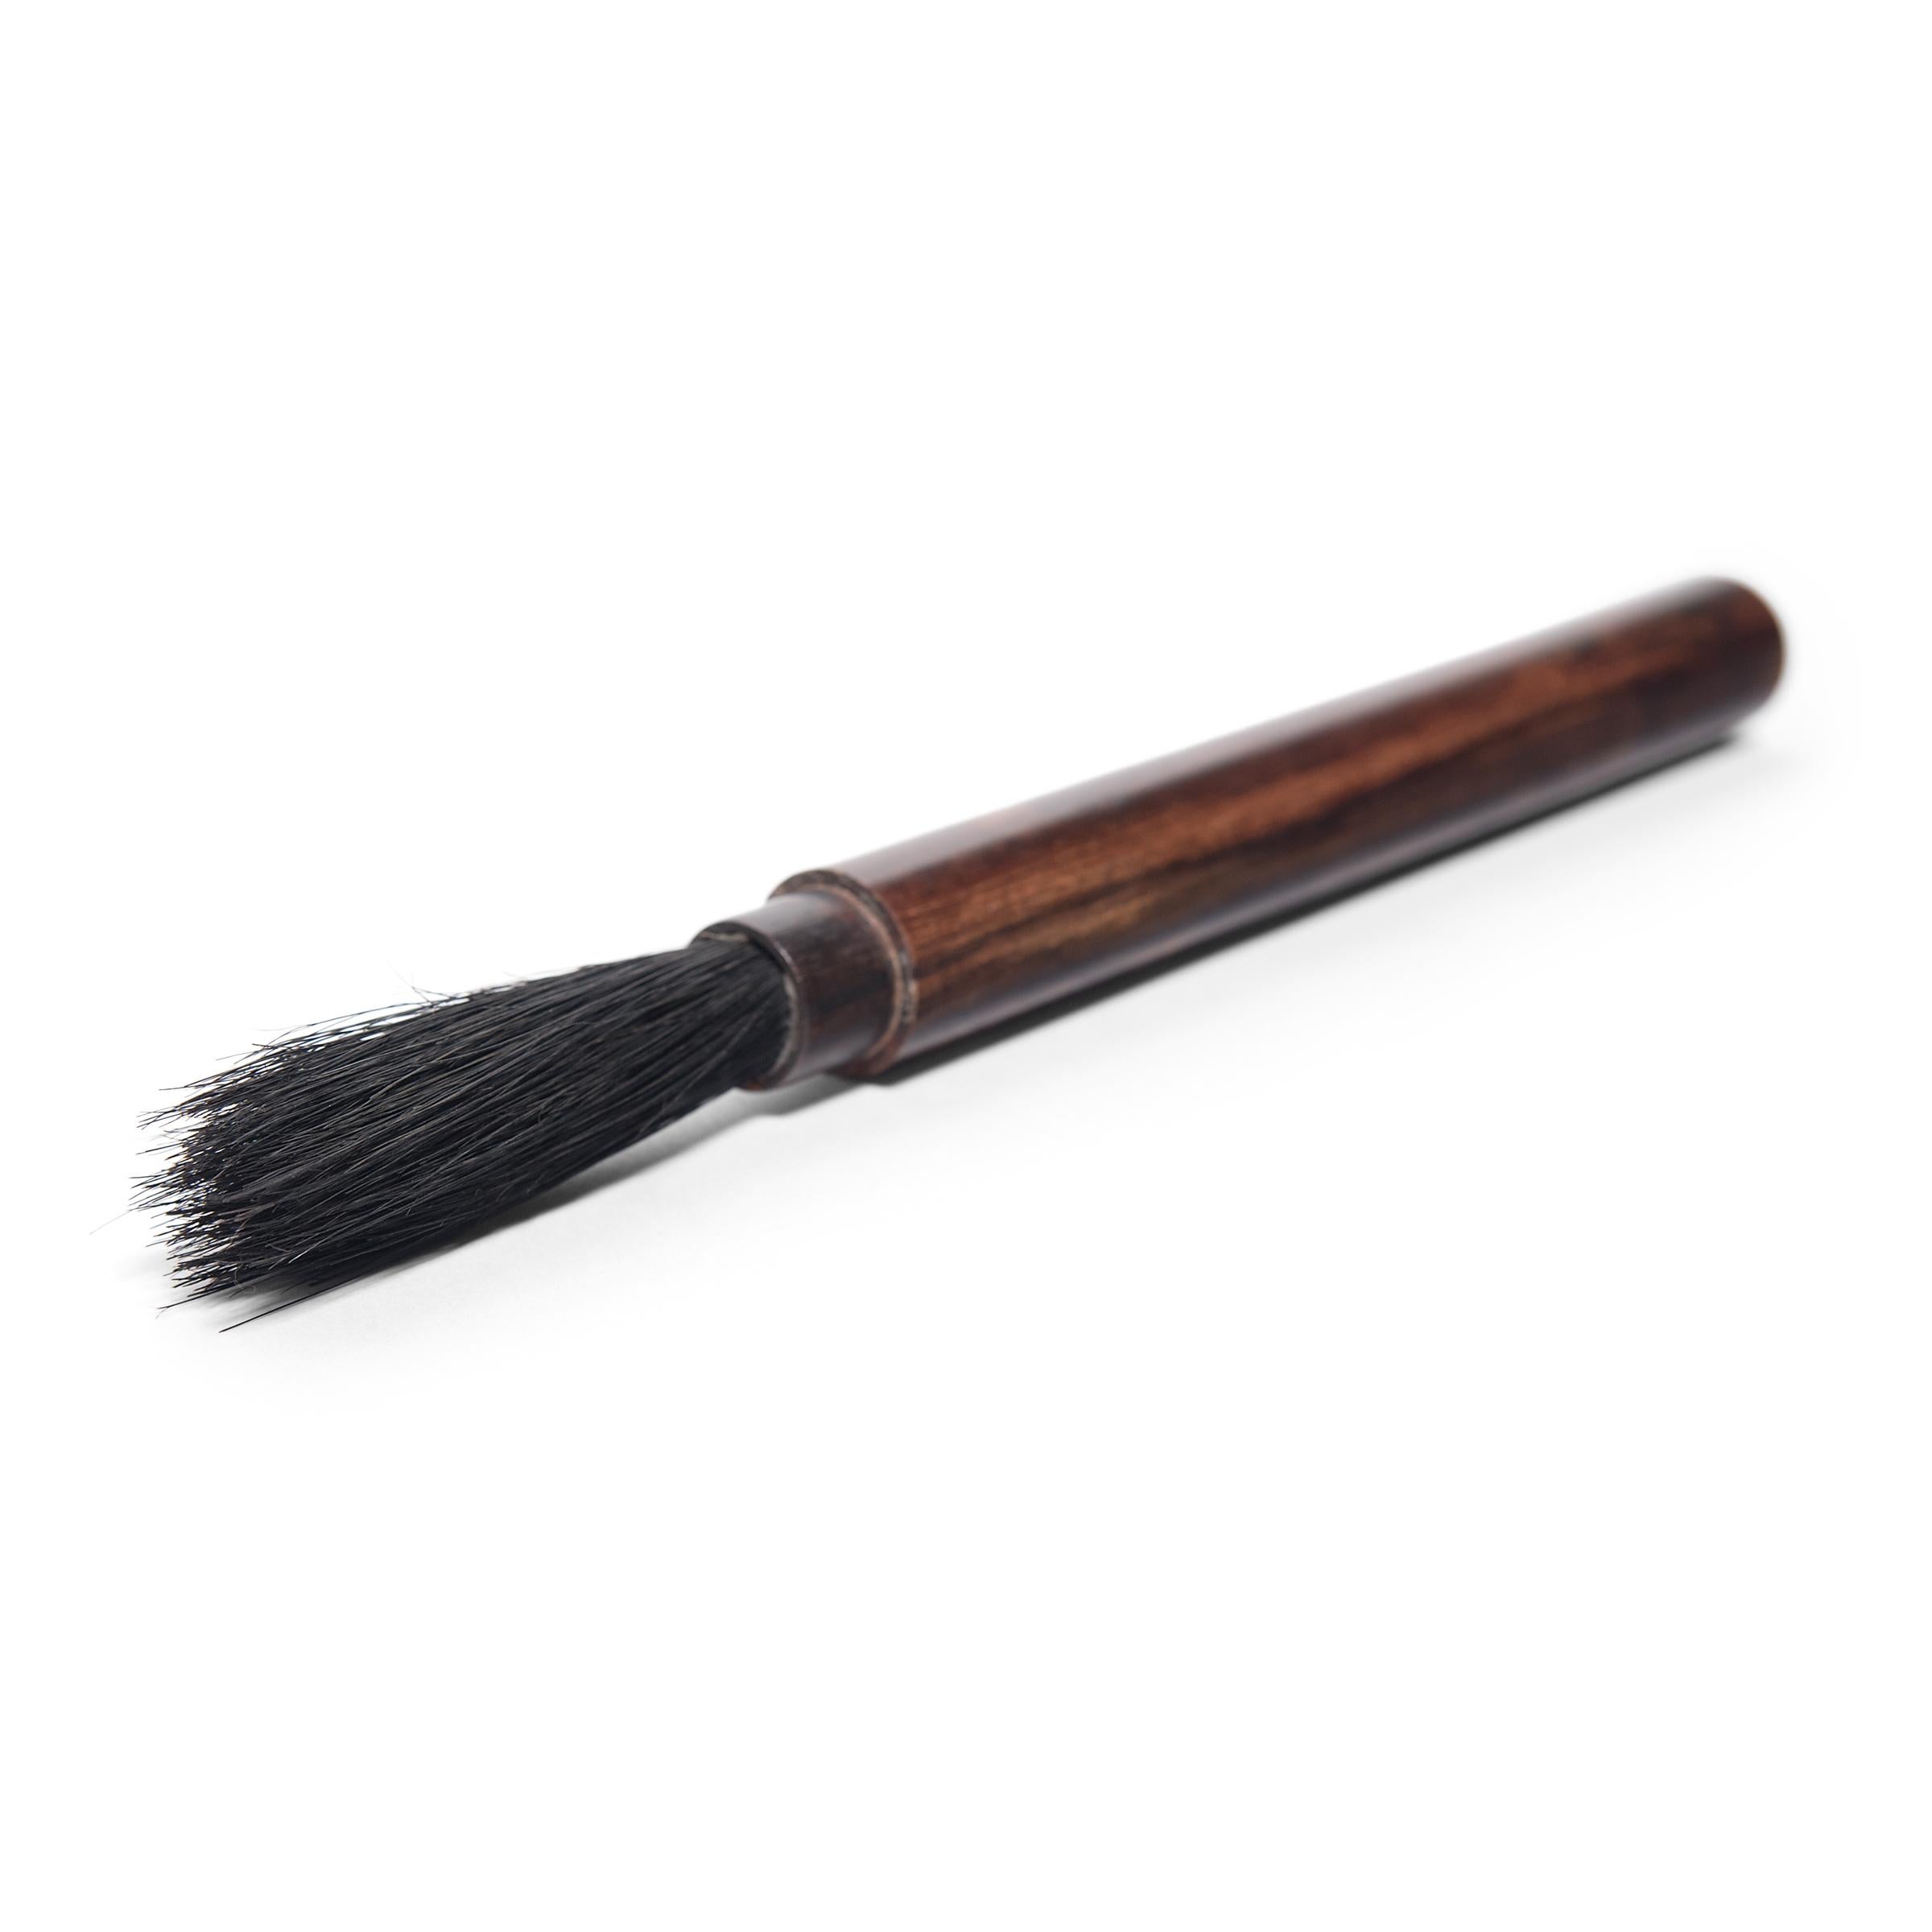 Dated to the early 20th century, this fine calligraphy brush would have been an essential tool for a Qing-dynasty scholar-official, used to draft official documents or compose poetry. A scholar's tools were symbols of his status and were frequently